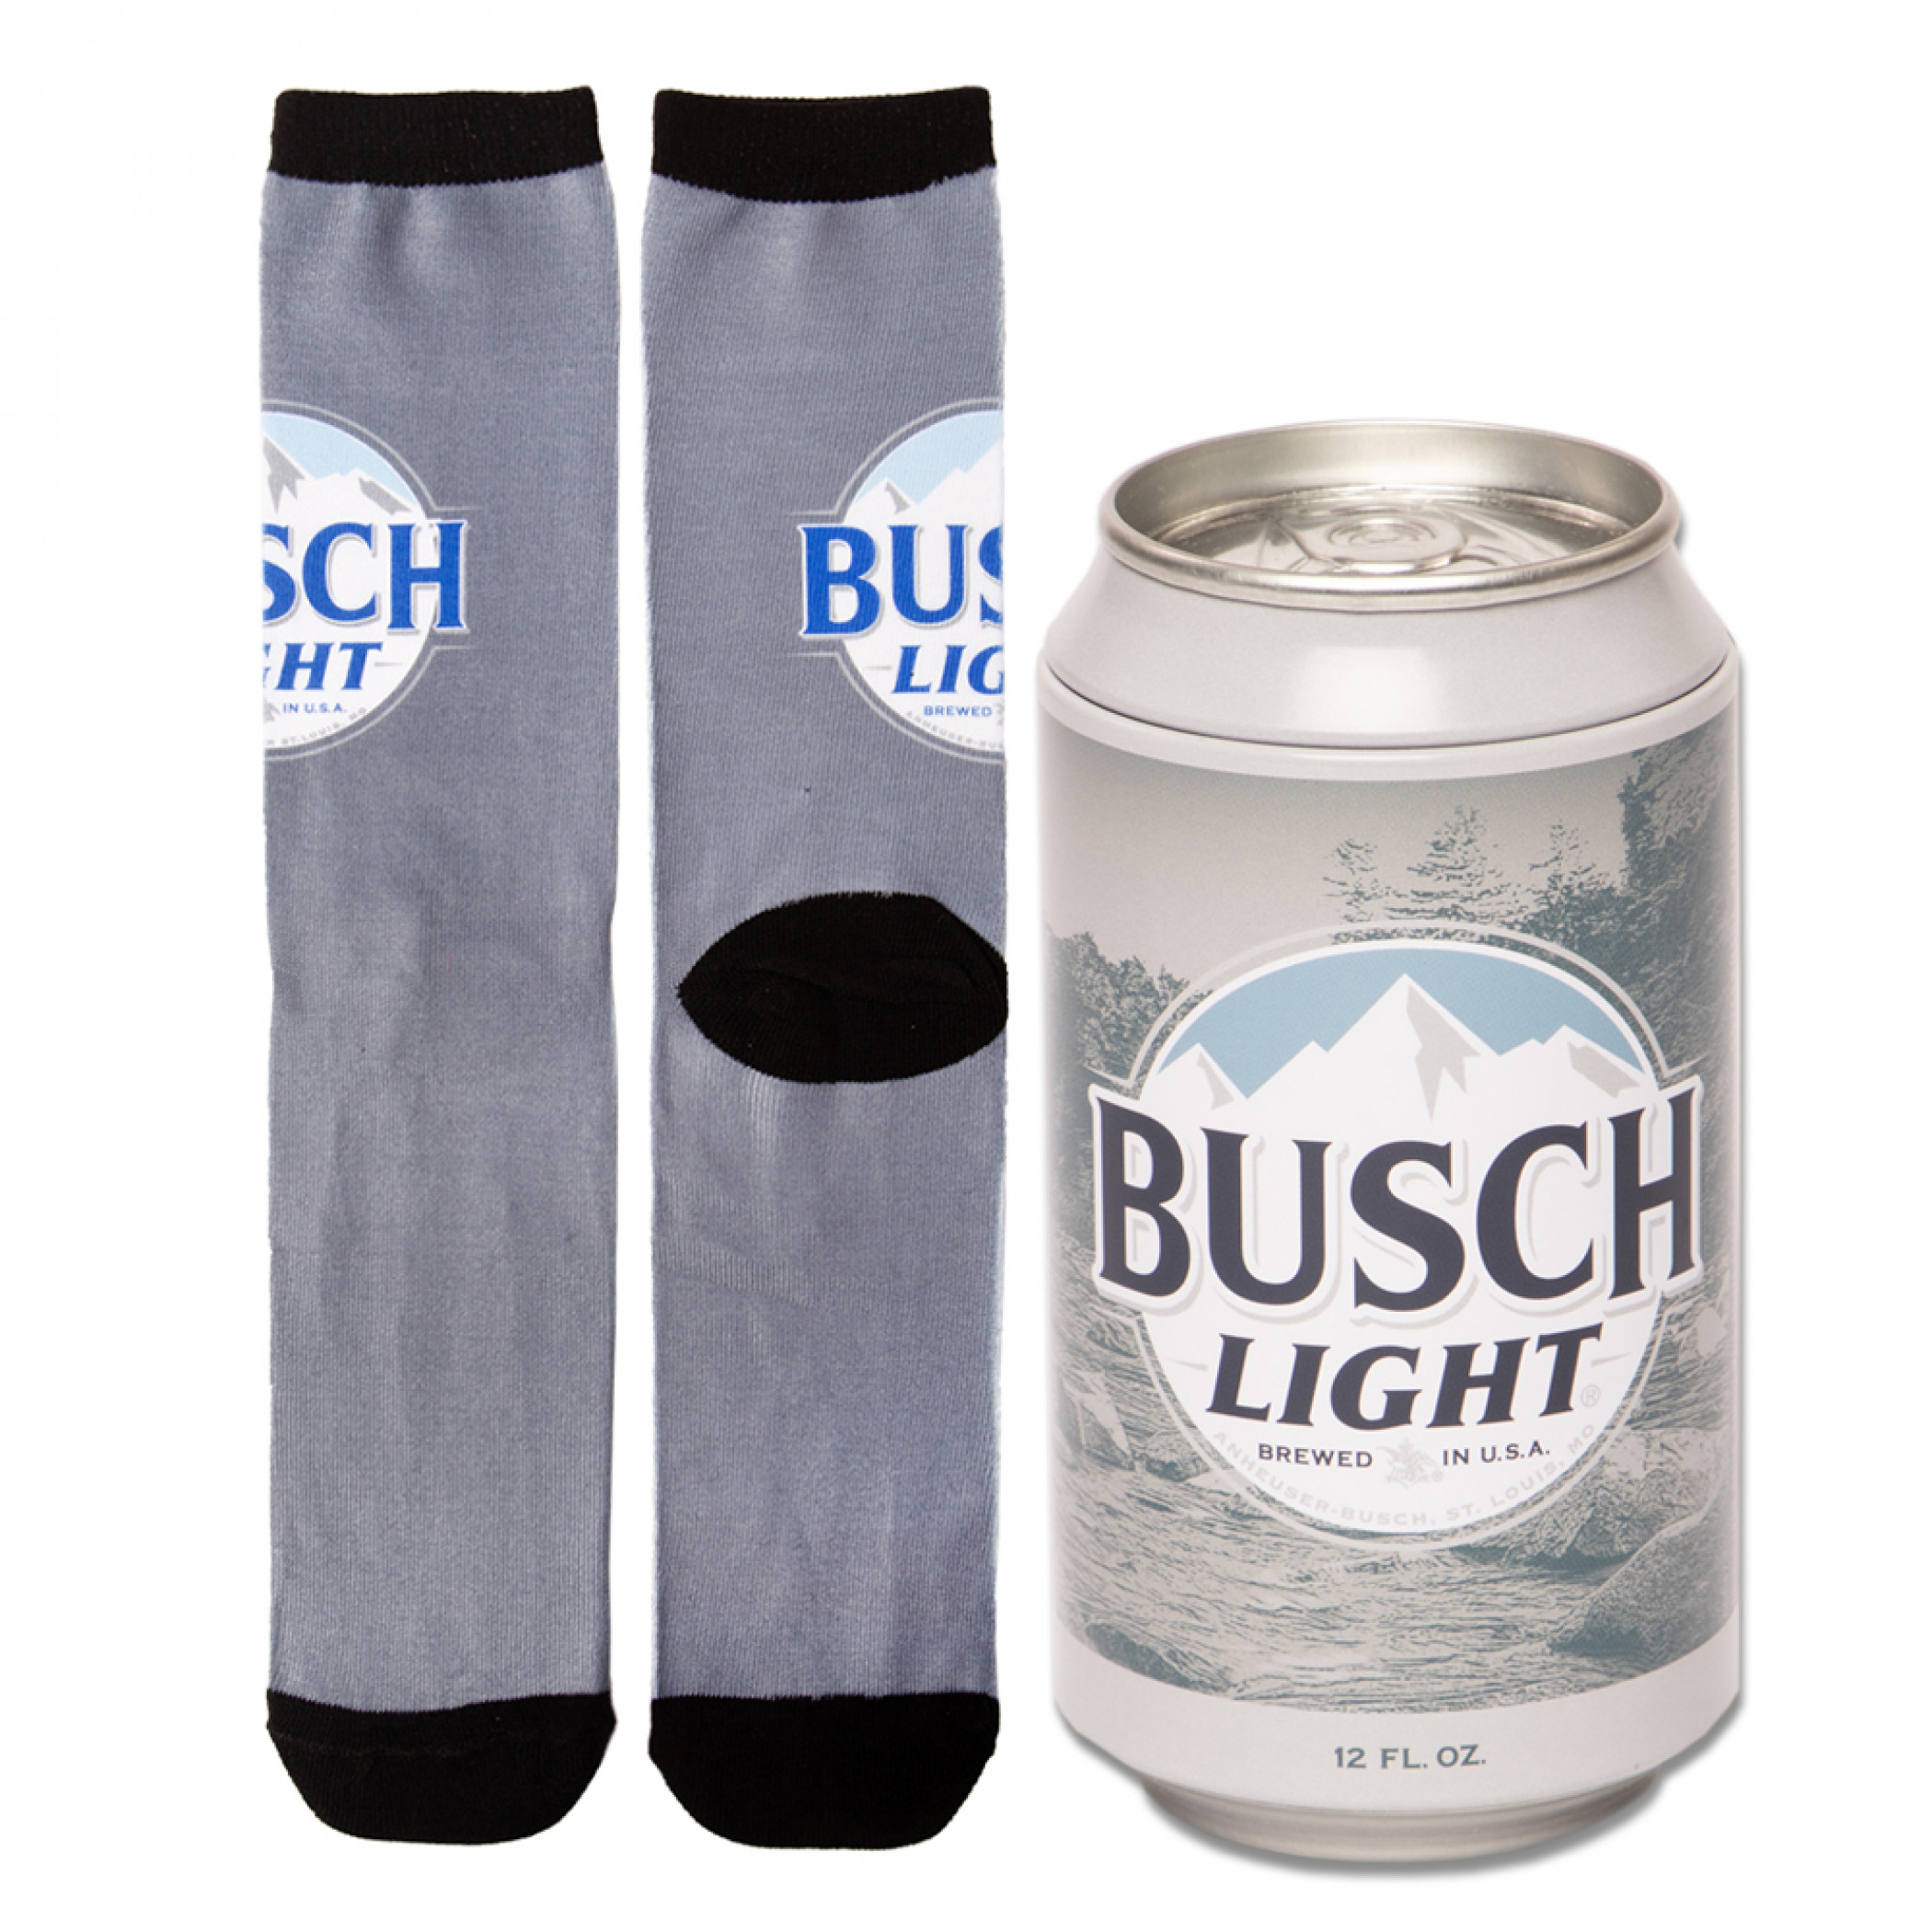 Busch Light Beer Mountains Logo Crew Socks In Beer Can Gift Packaging